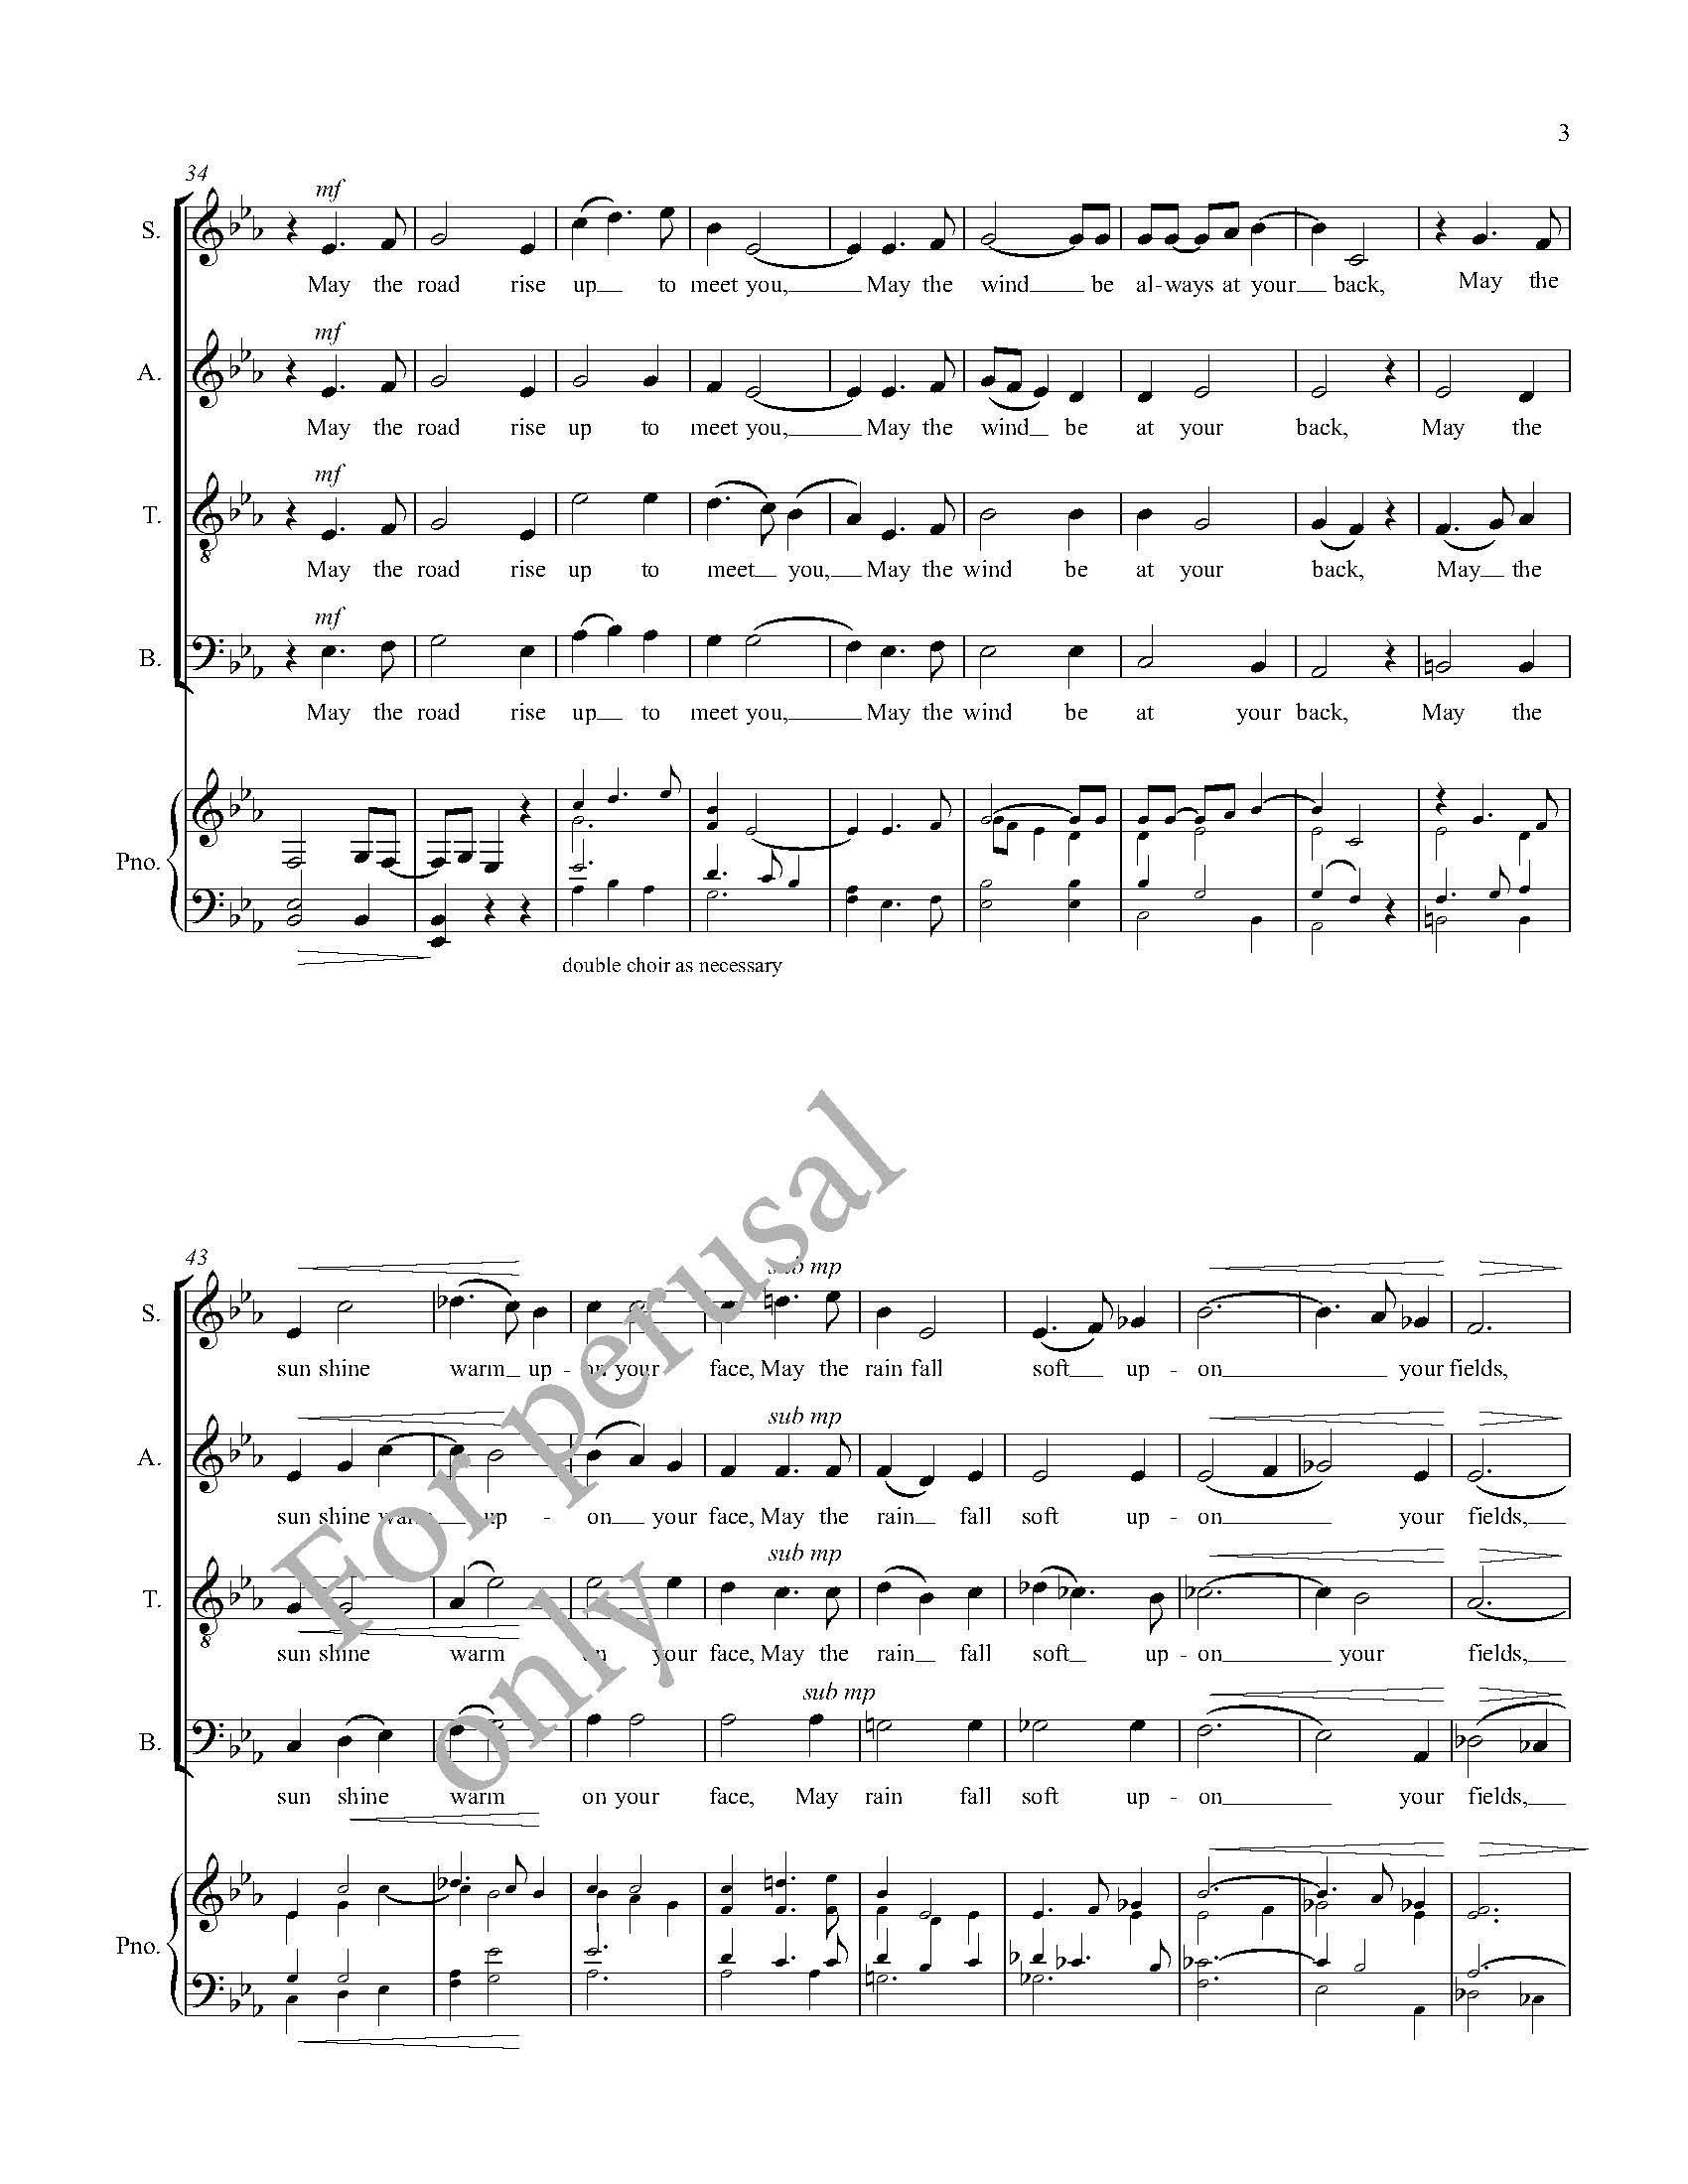 SCORE - preview An Irish Blessing for SATB and piano by Ryan James Brandau_Page_3.jpg